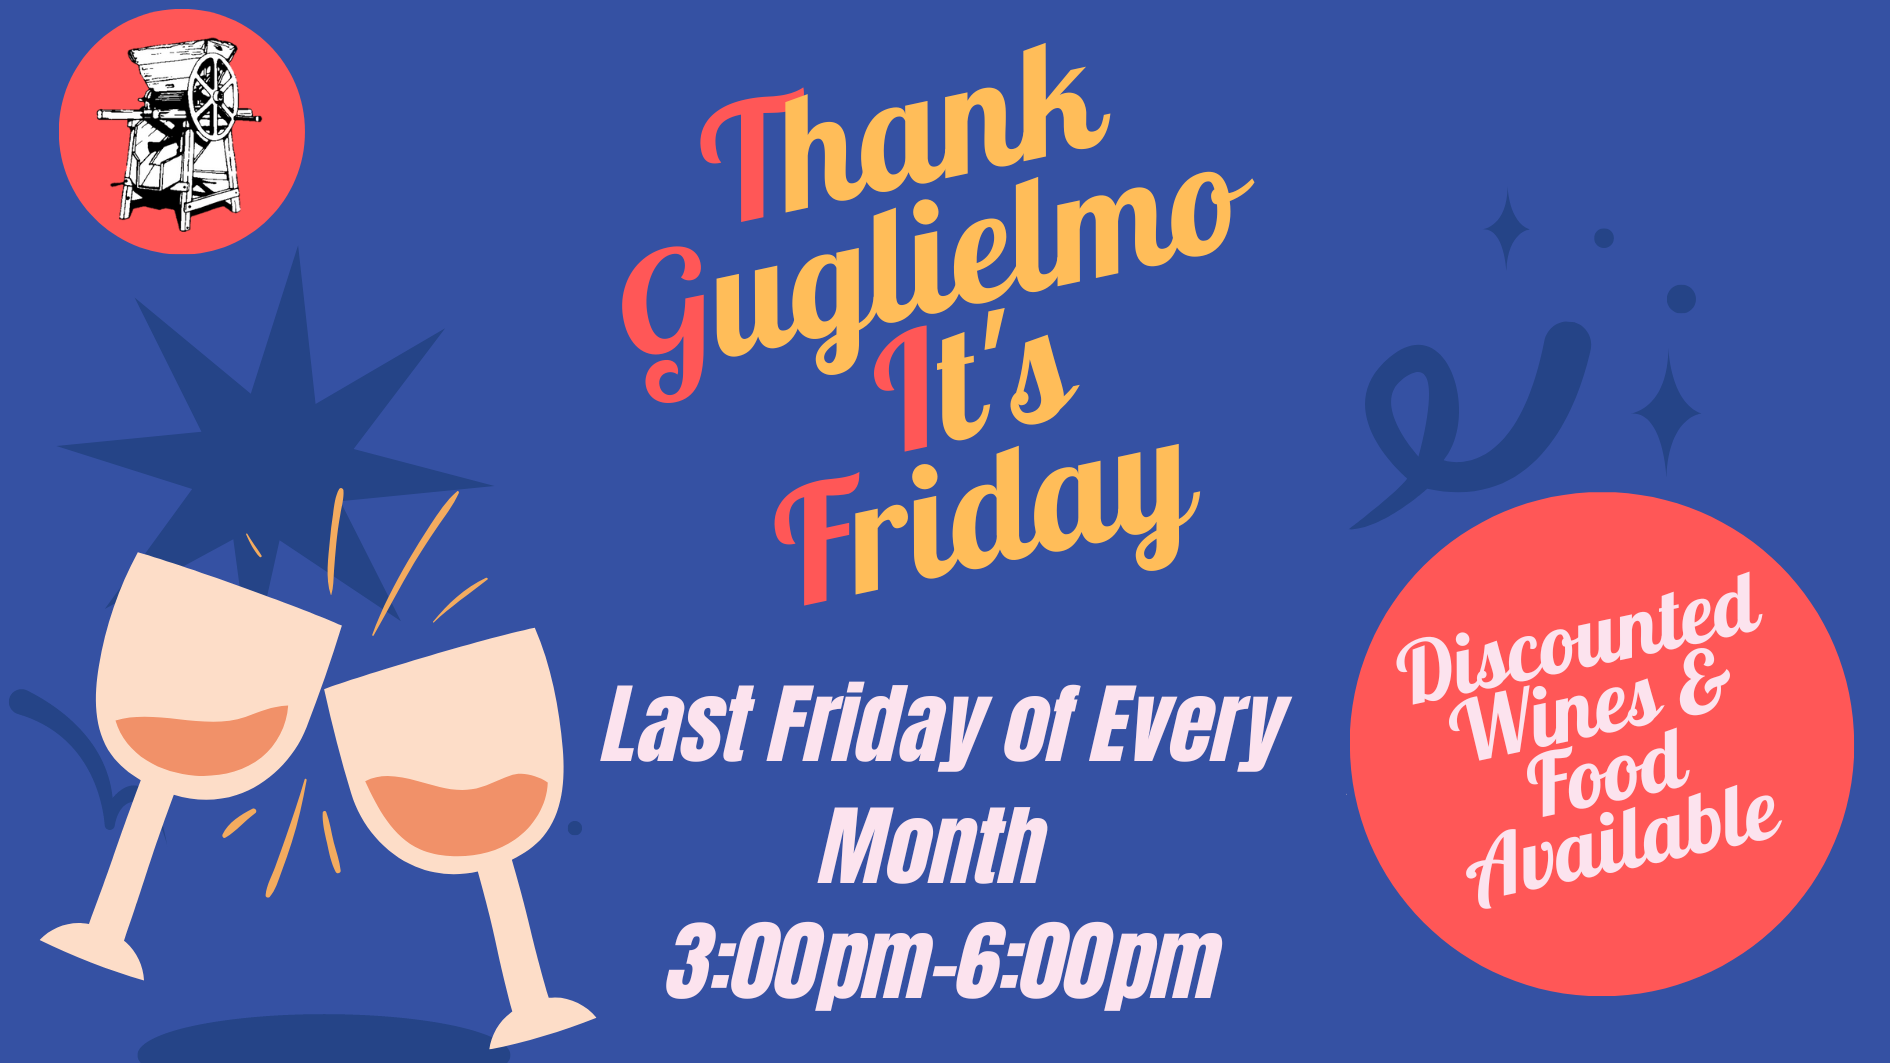 Thank Guglielmo it's Friday Monthly Event